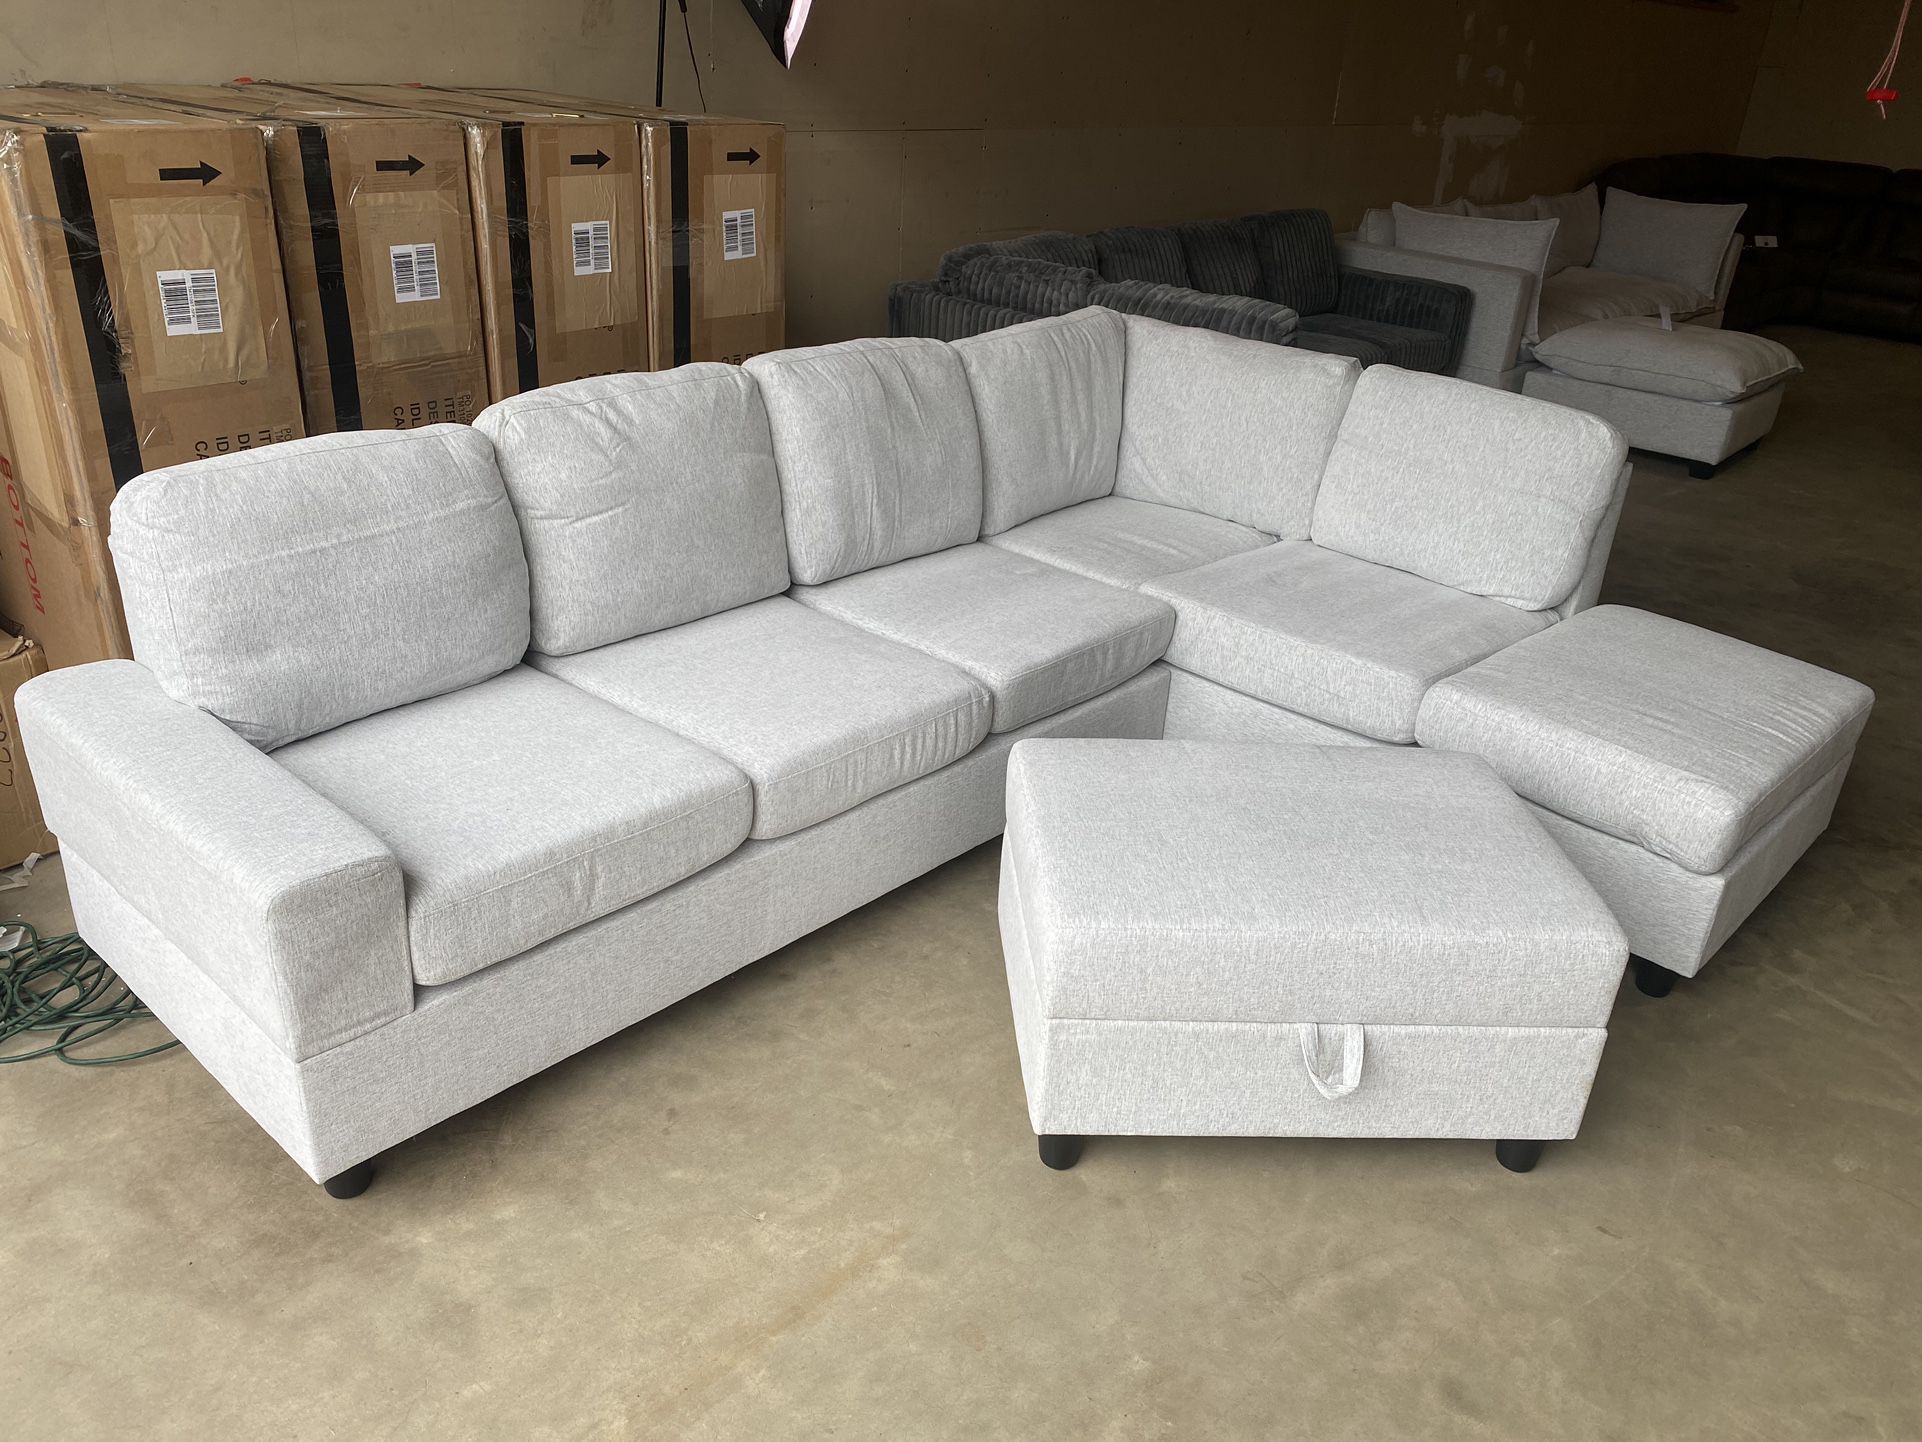 FREE DELIVERY AND INSTALLATION - Brand New in box gray Sectional and Ottoman (Look my profile)